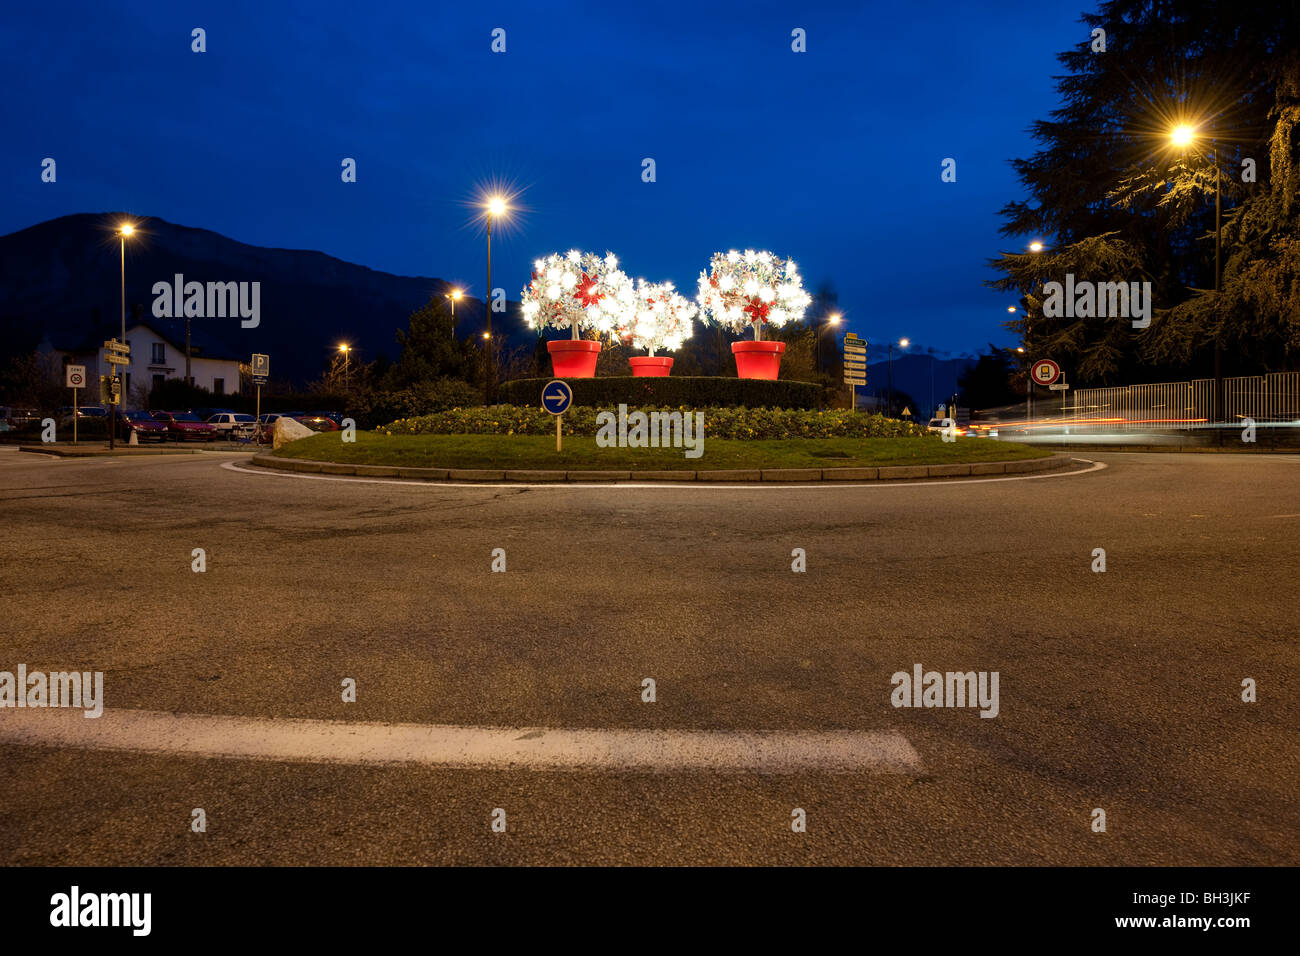 Roundabout decorated for Christmas in Annecy, France, photographed during early evening. Stock Photo